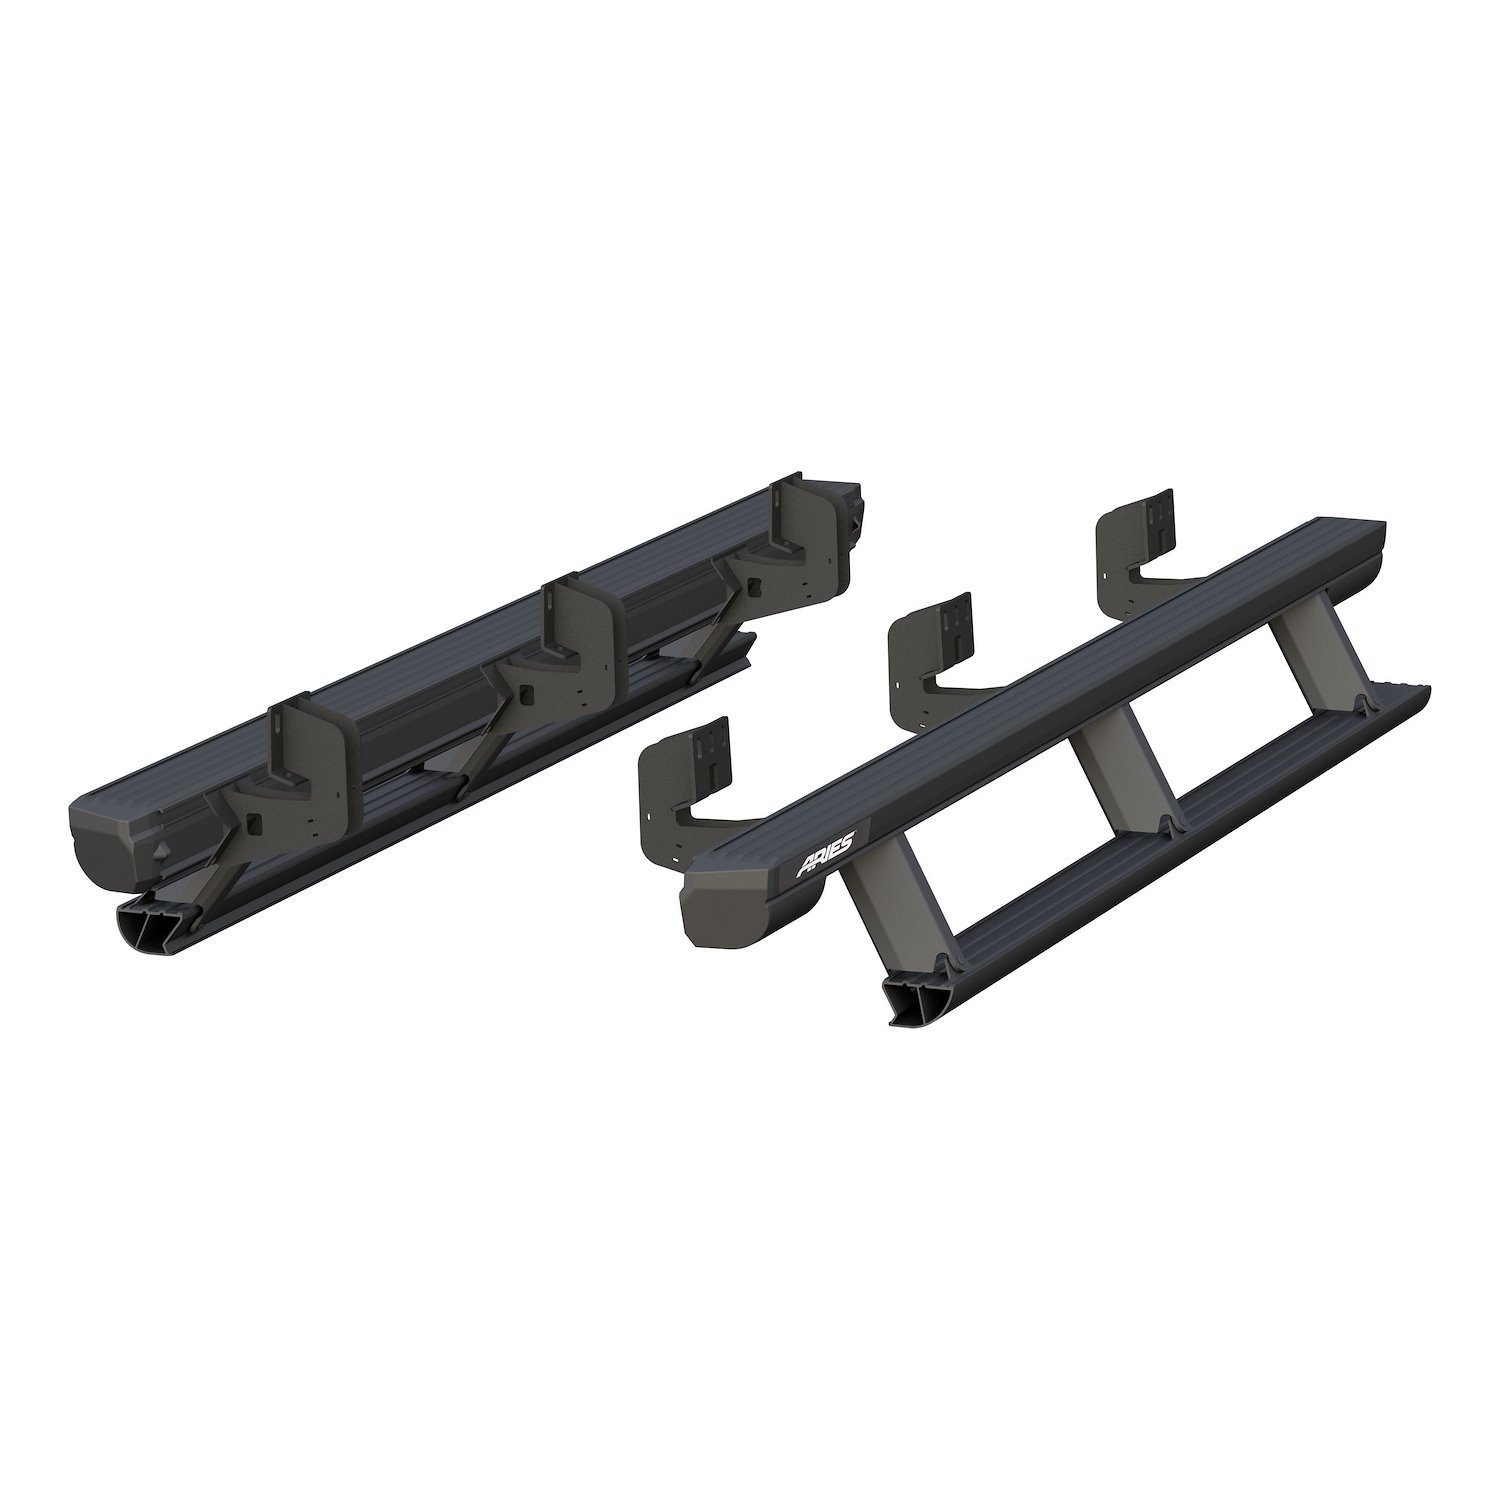 ActionTrac Powered Running Boards for 2009-2014 F-150 SuperCrew Cab Trucks